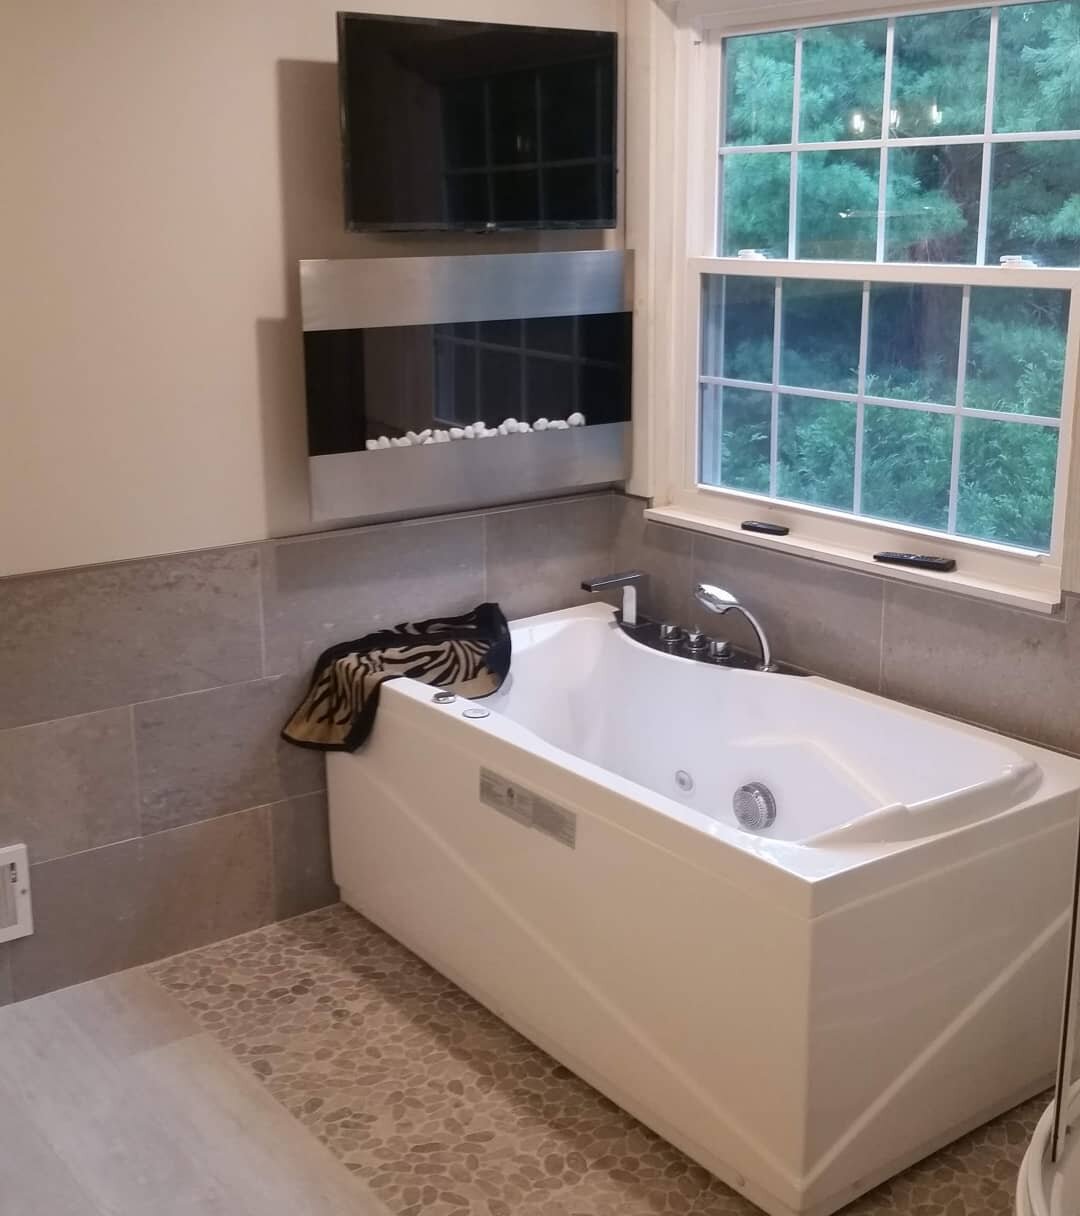 Another one from the recent bath remodel. Loving the customers decision to go with the split in the flooring. Really adds an element to this bathroom. 
#triplerhomeservices #qualitycraftsmanship #bathremodel #bathfloor #bathroom #bathremodel #bathroo